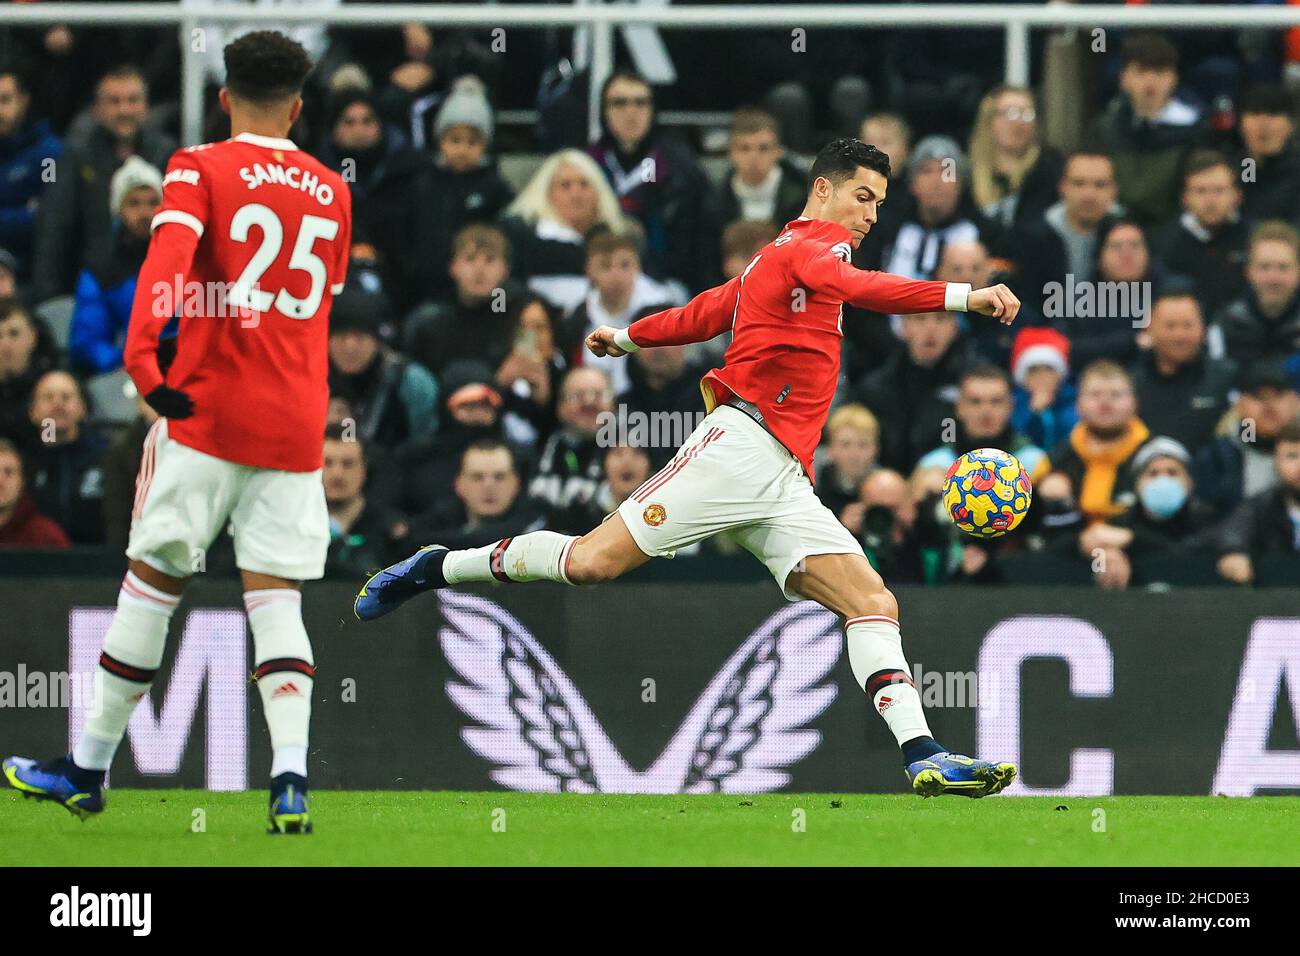 Cristiano Ronaldo #7 of Manchester United shoots on goal but in, on 12/27/2021. (Photo by Mark Cosgrove/News Images/Sipa USA) Credit: Sipa USA/Alamy Live News Stock Photo